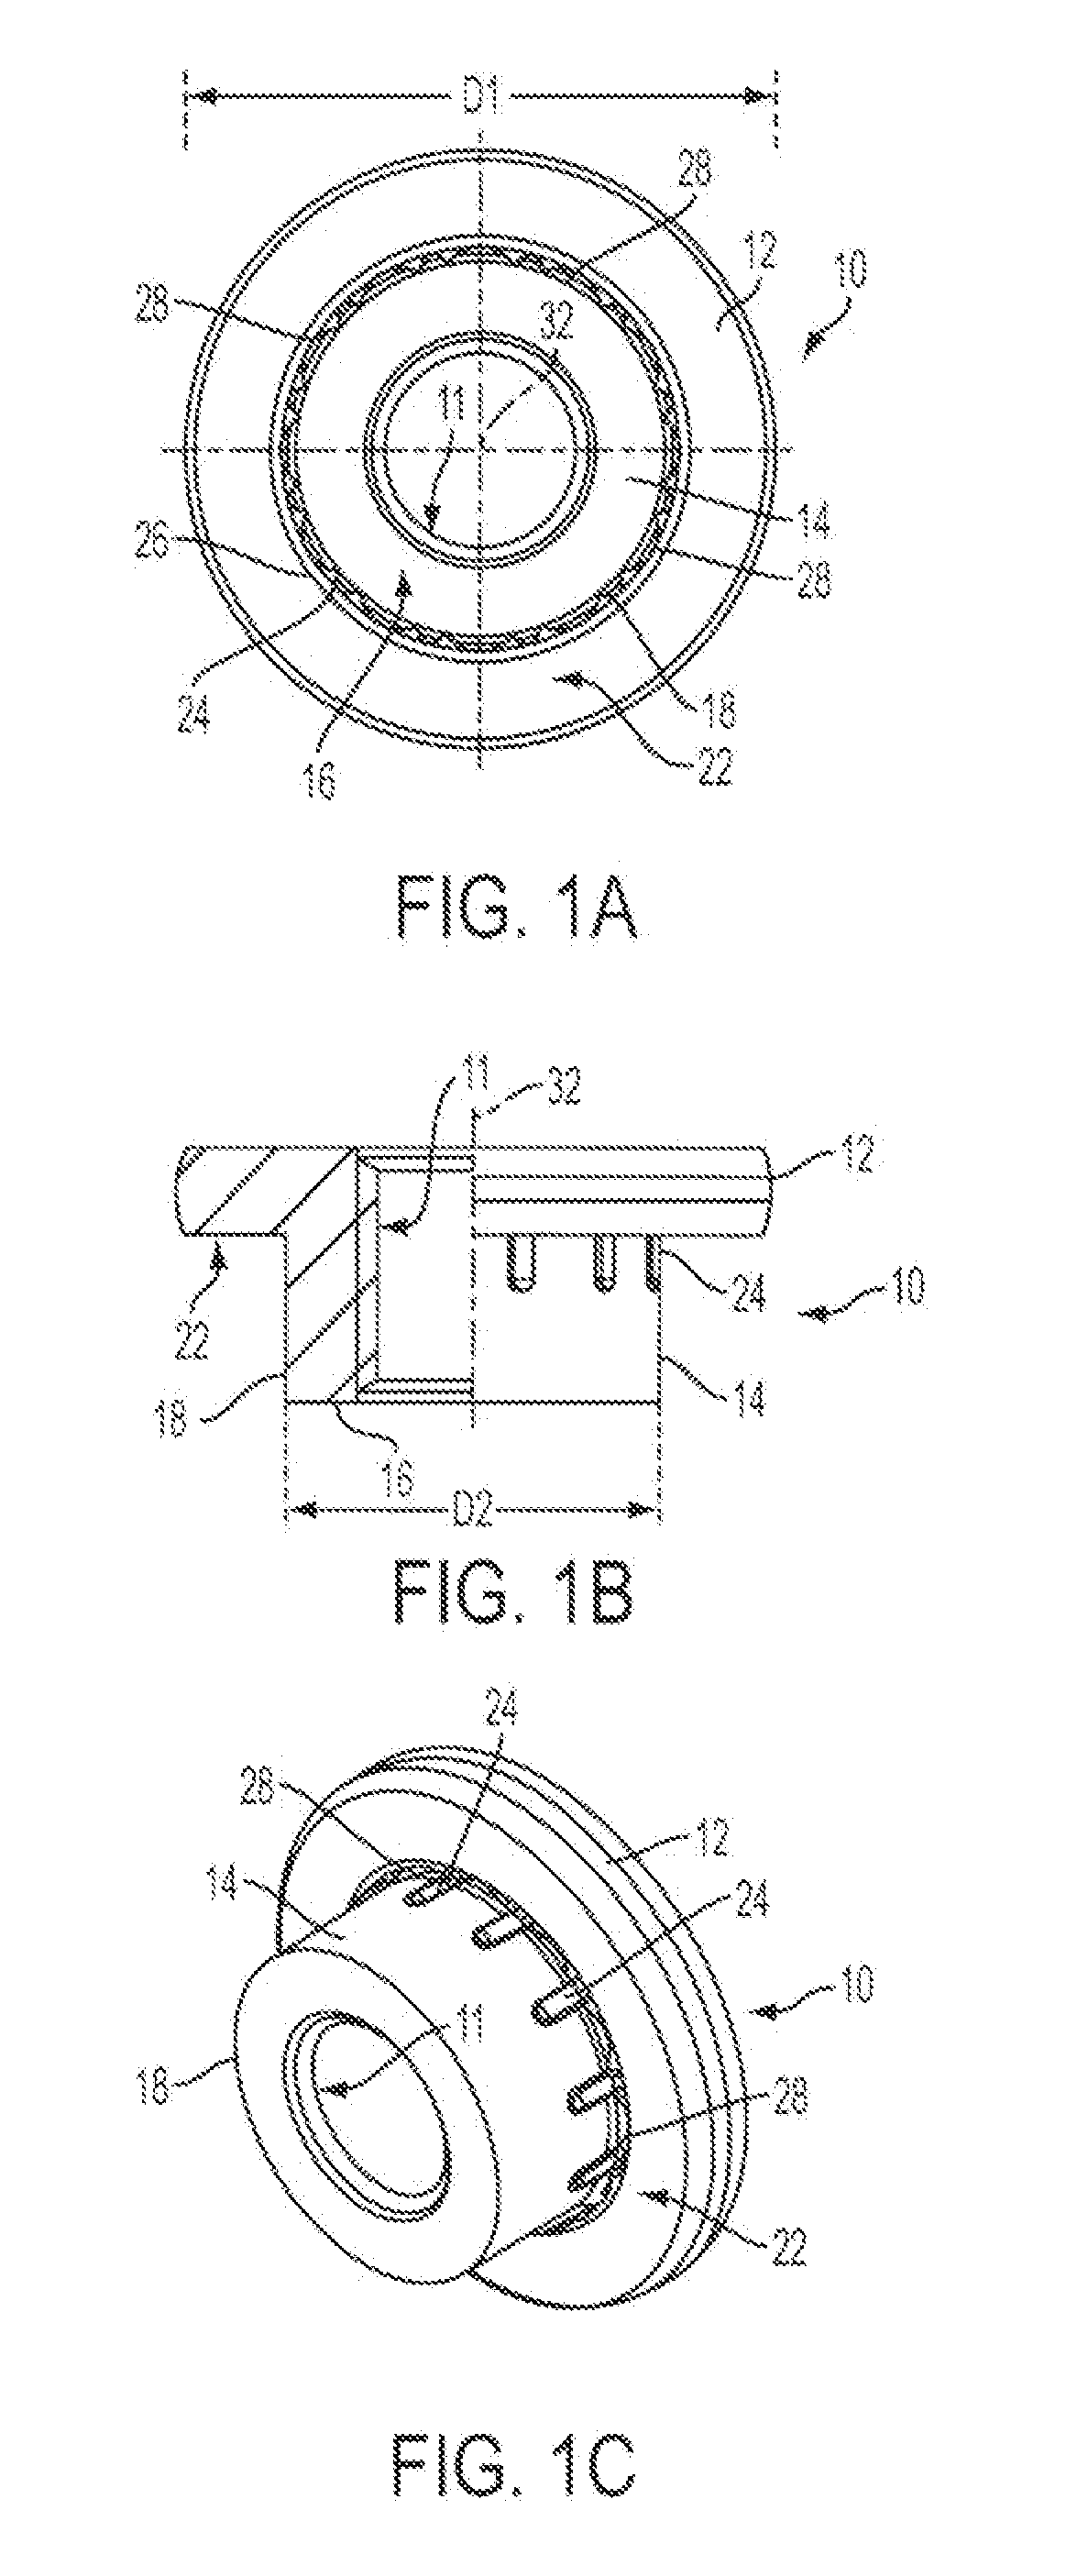 Press-in element, component assembly consisting of a press-in element and a sheet metal part and also methods for the manufacture and attachment of a self-piercing press-in nut